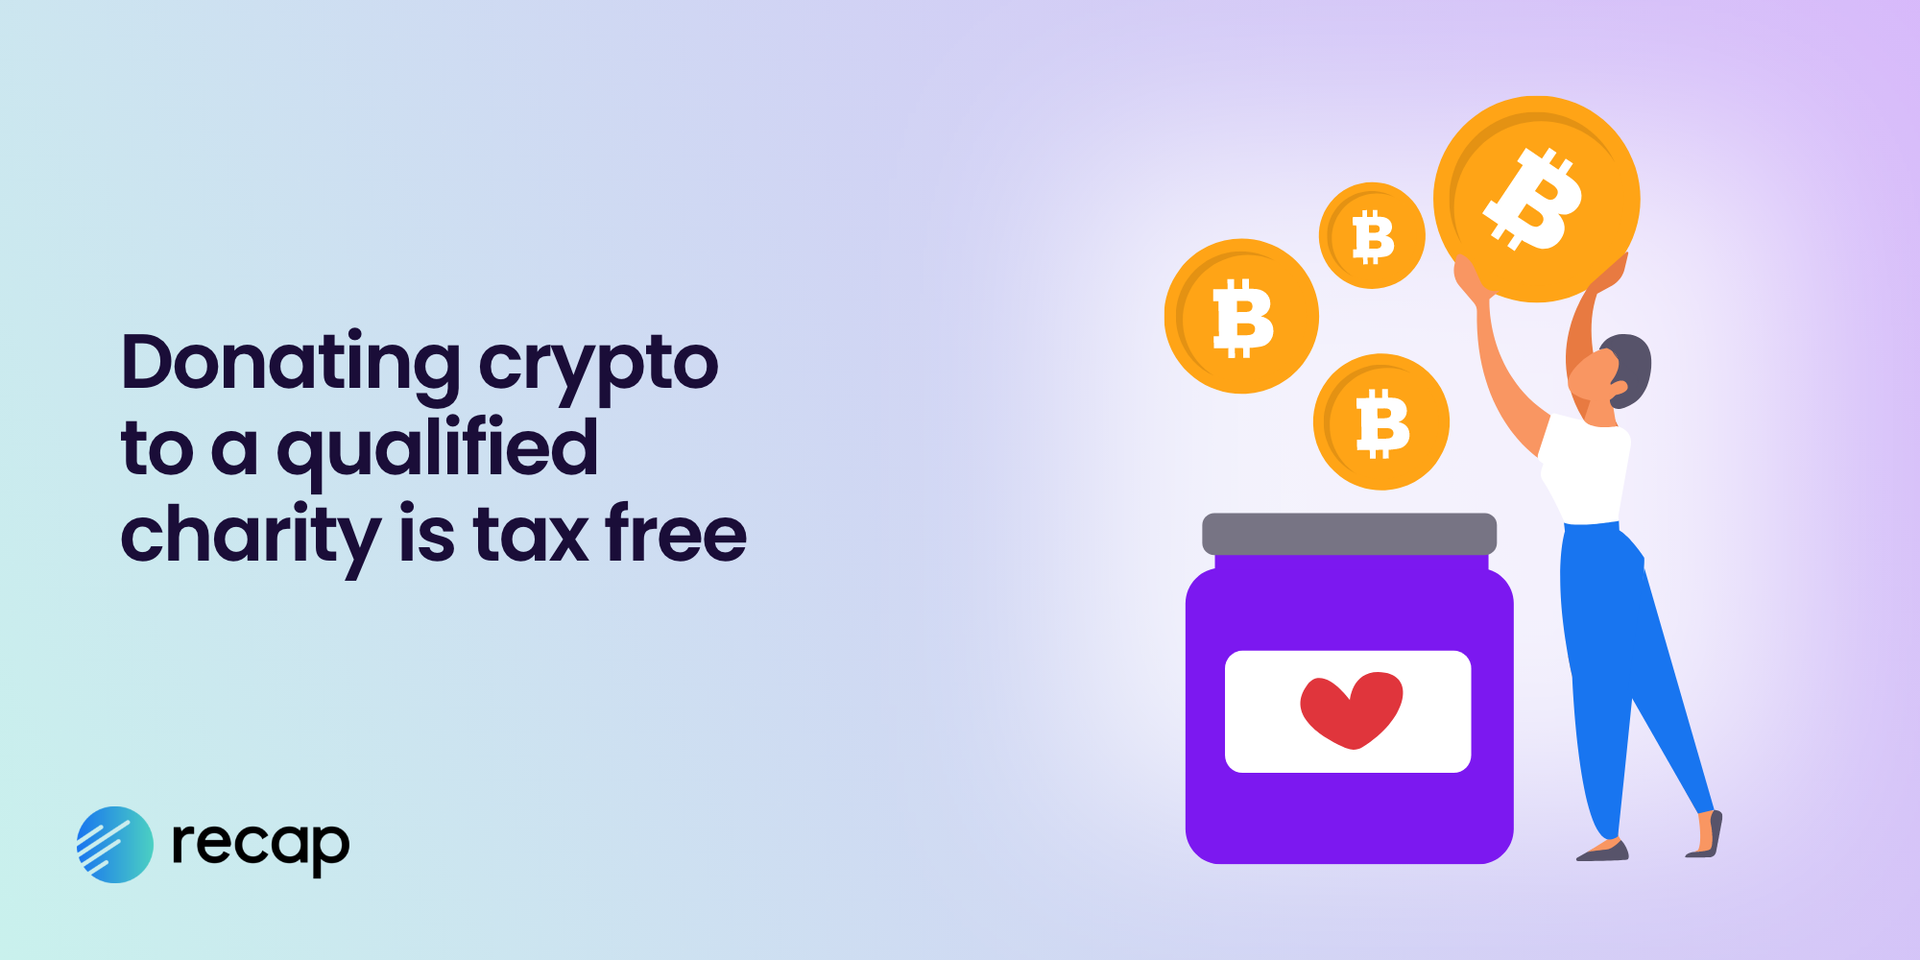 Illustration stating that donating crypto to a qualified charity is tax free